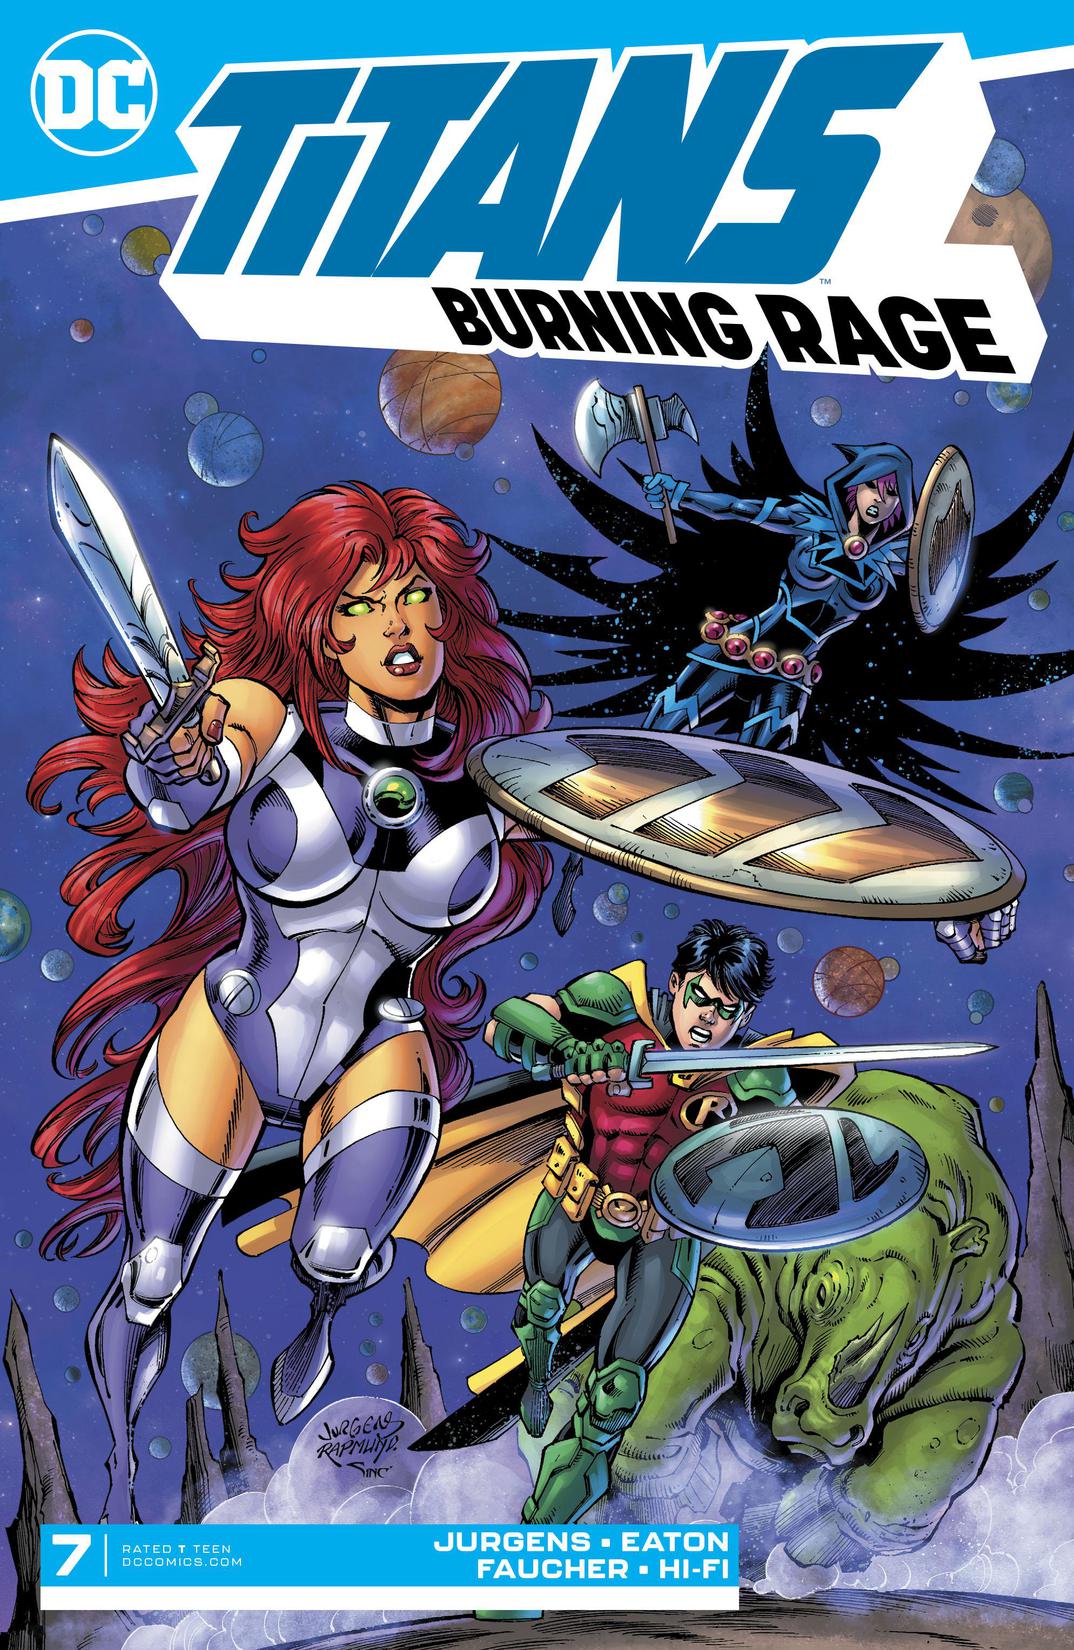 Titans: Burning Rage #7 preview images